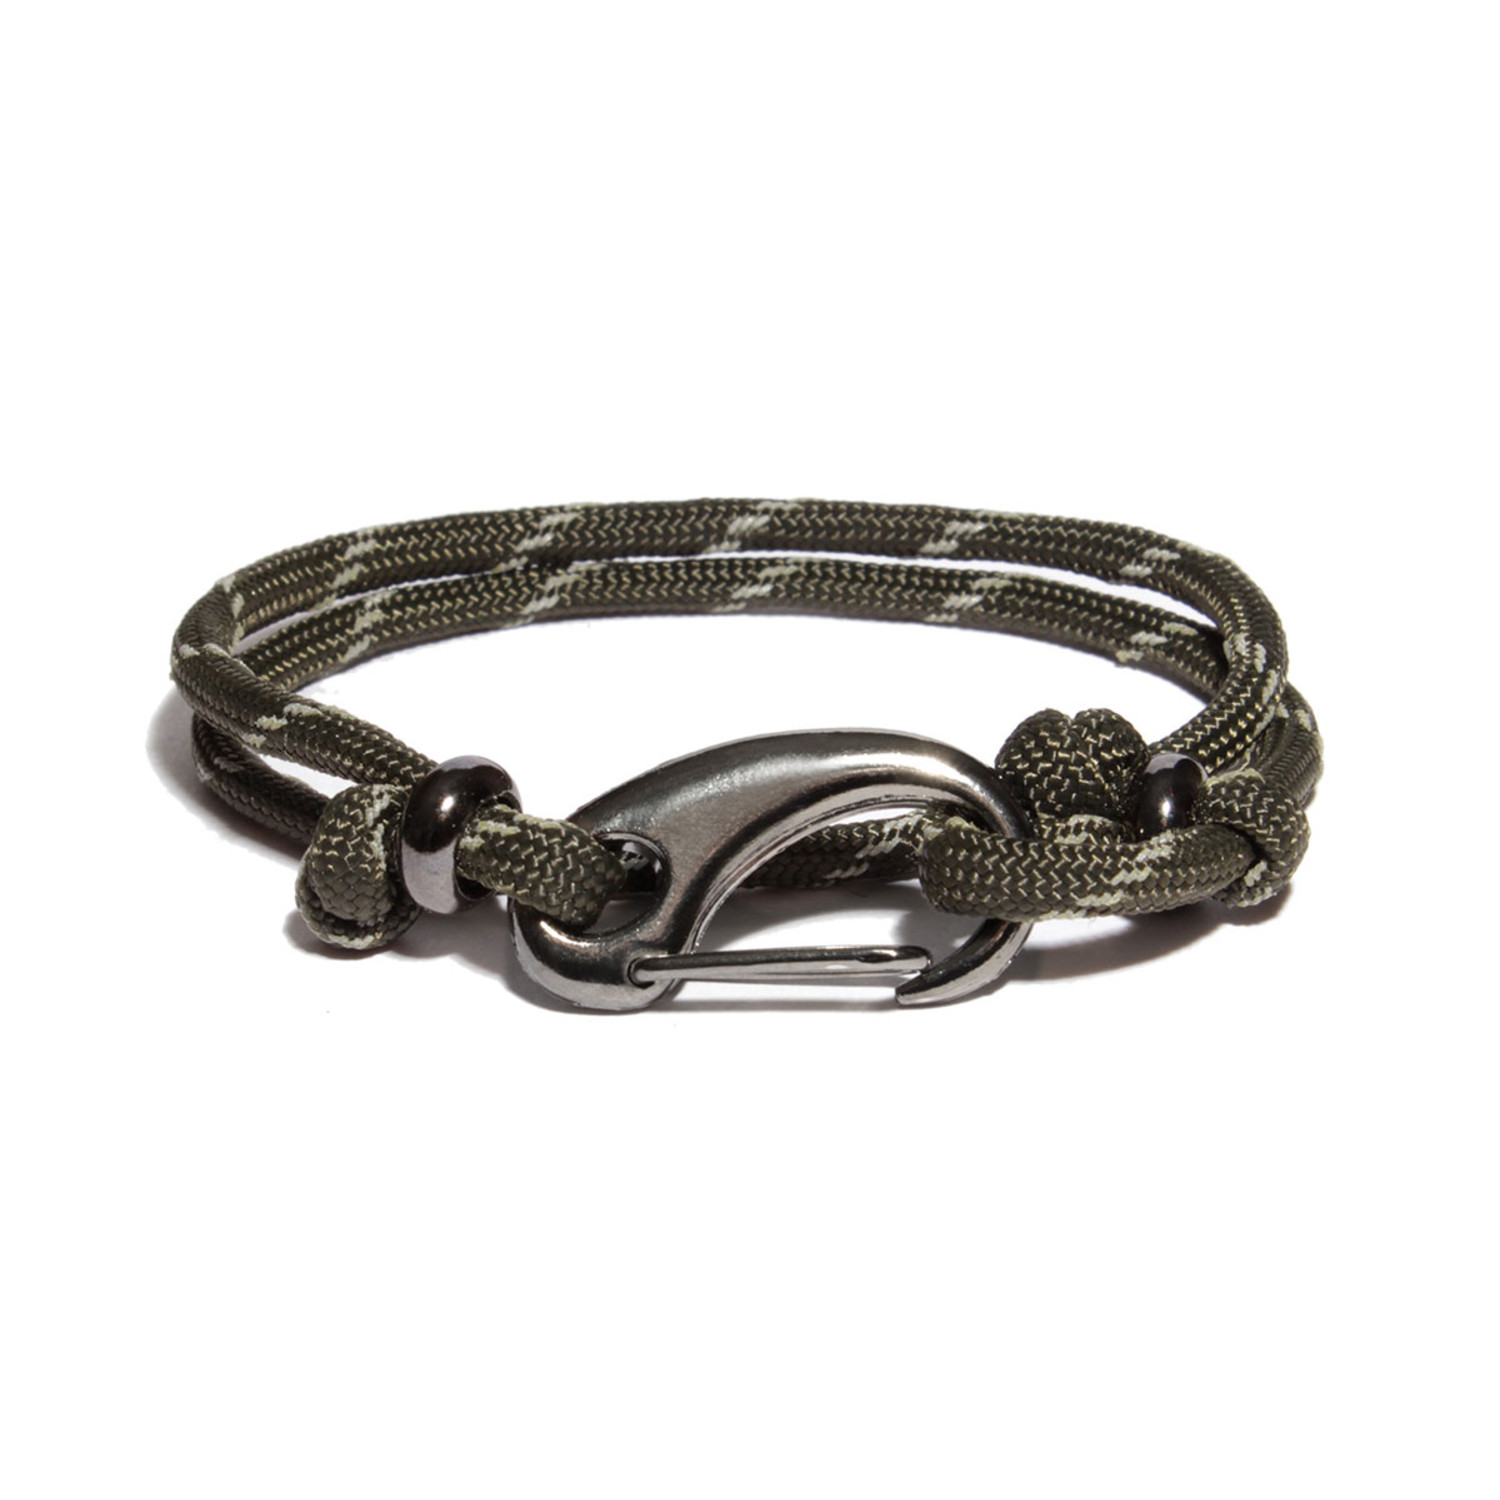 Olive Paracord Bracelet - We Are All Smith - Touch of Modern